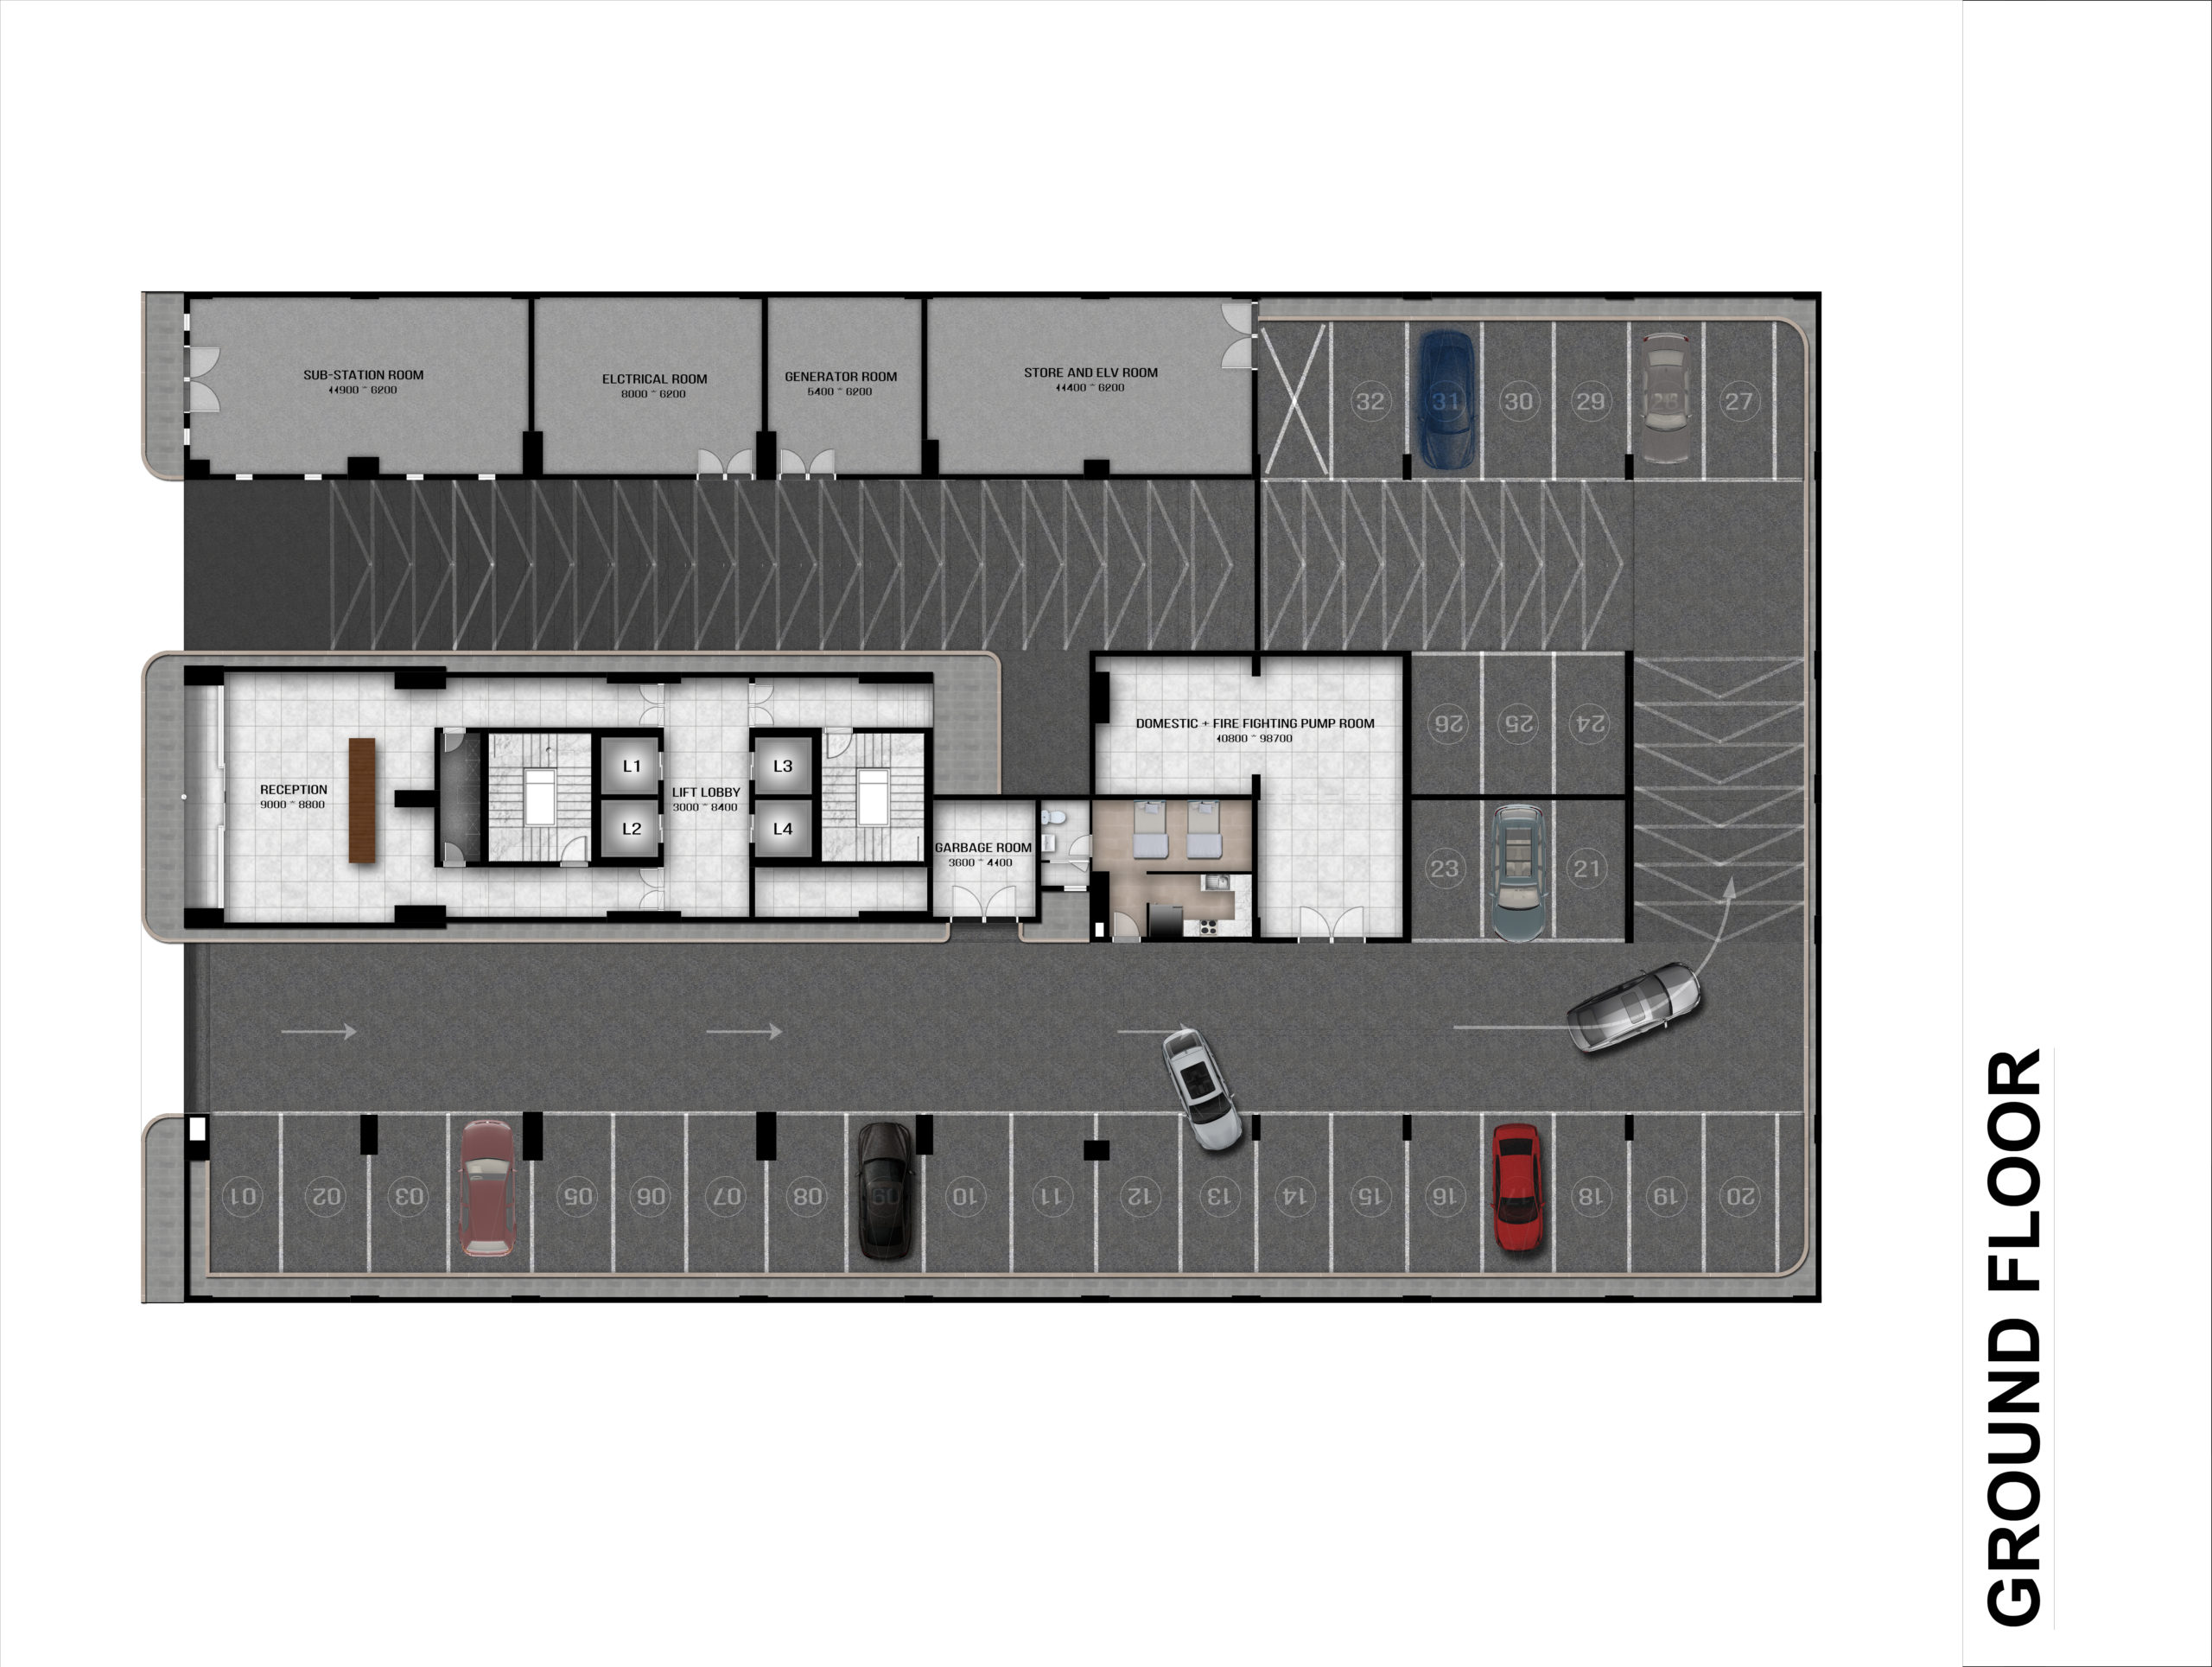 A Memaar floor plan of a building with two parking spaces.